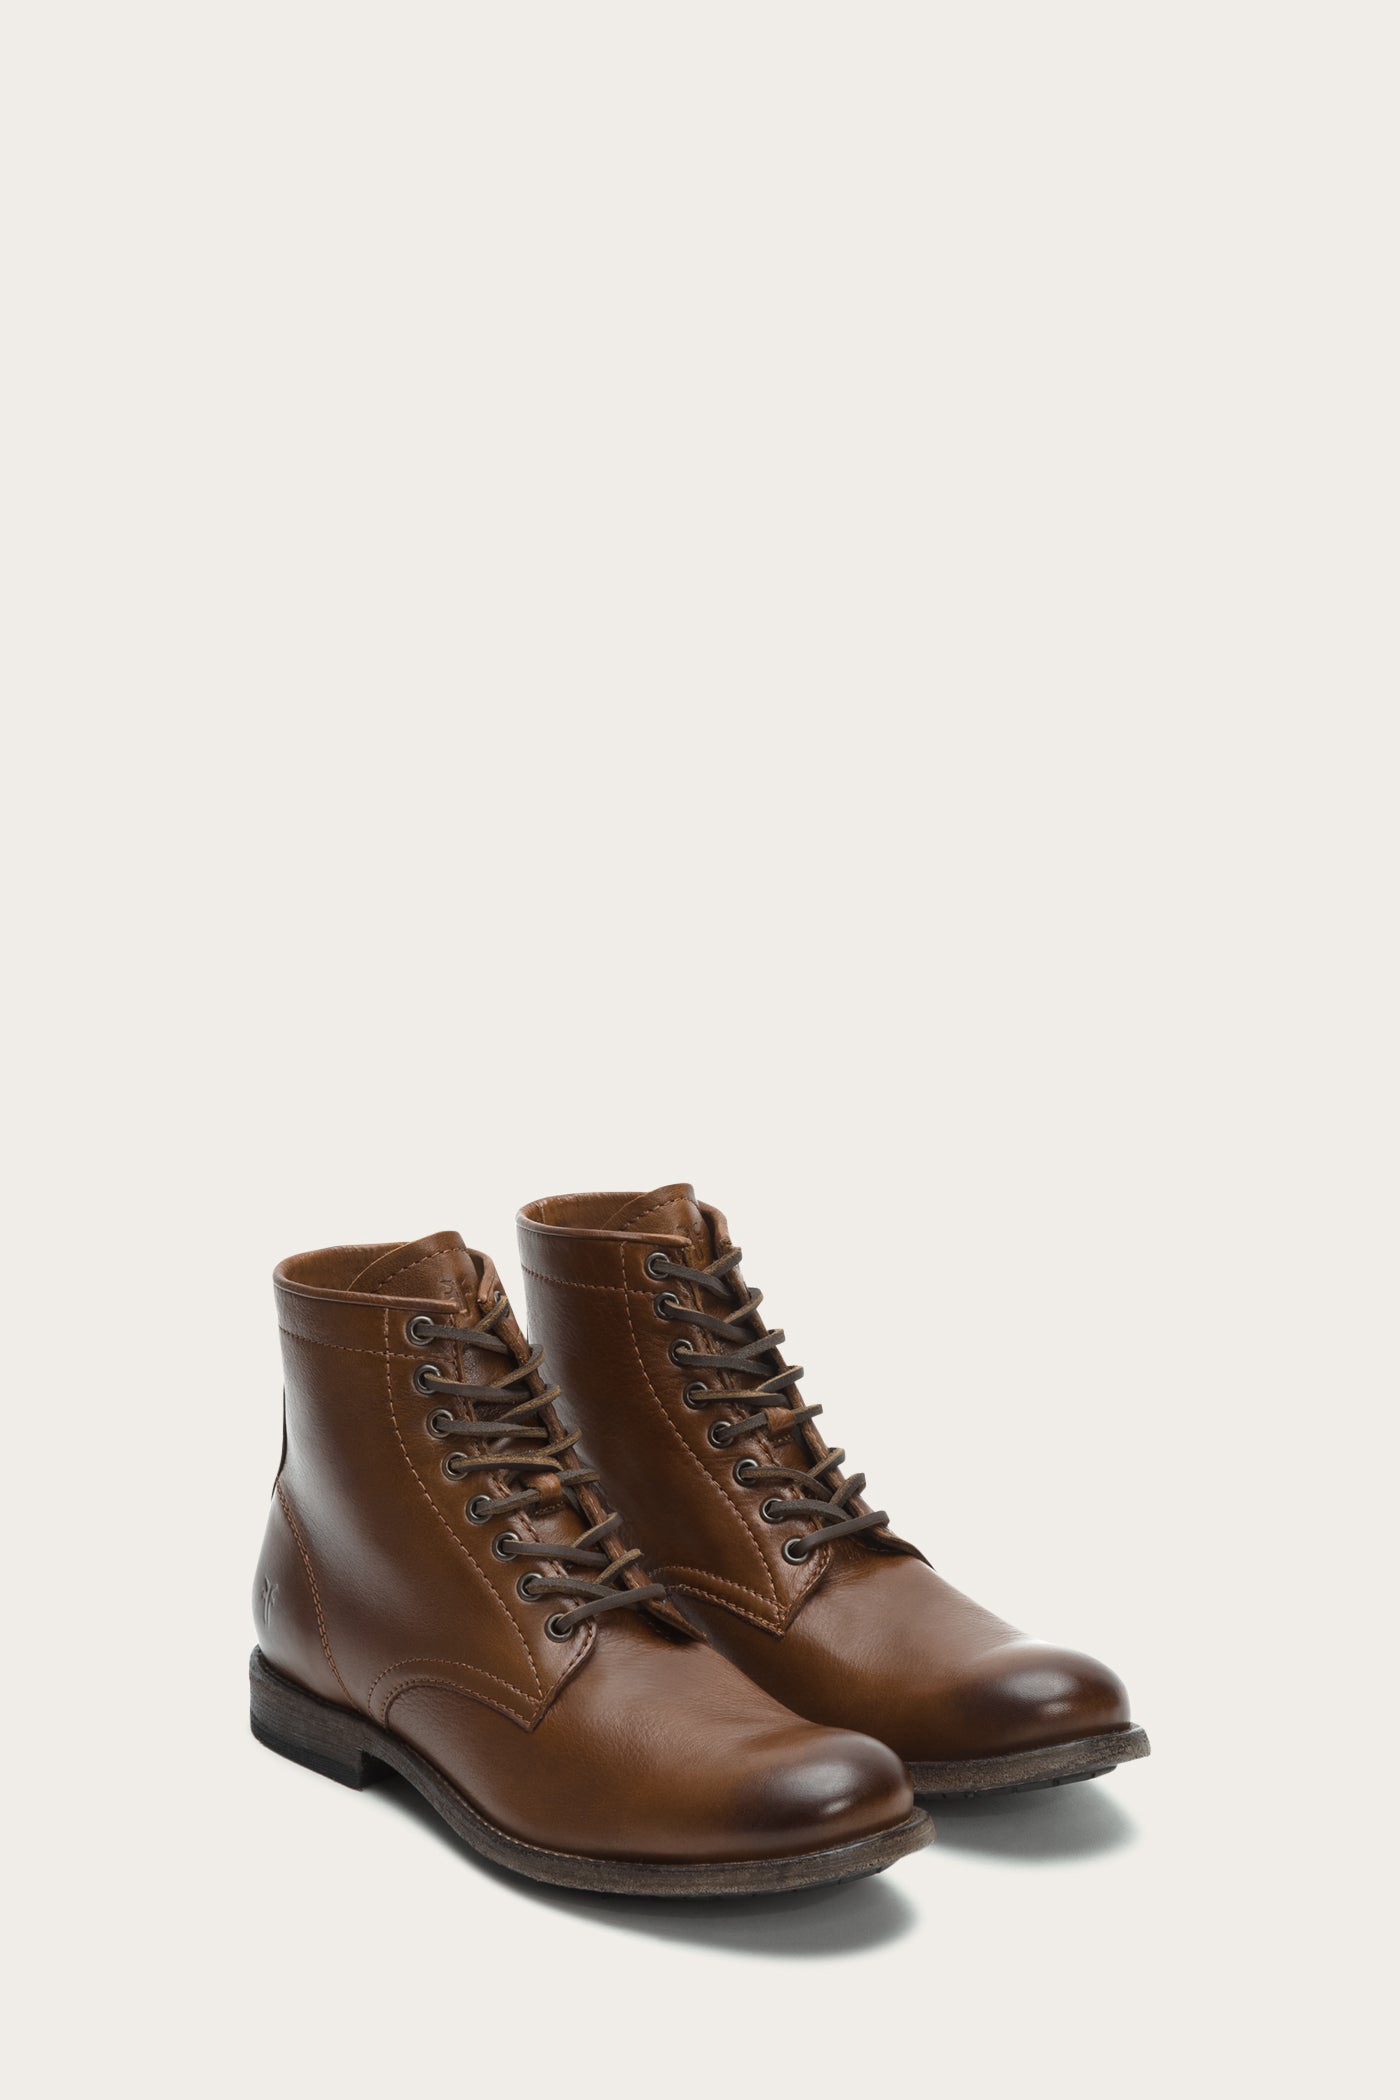 frye lace up boots